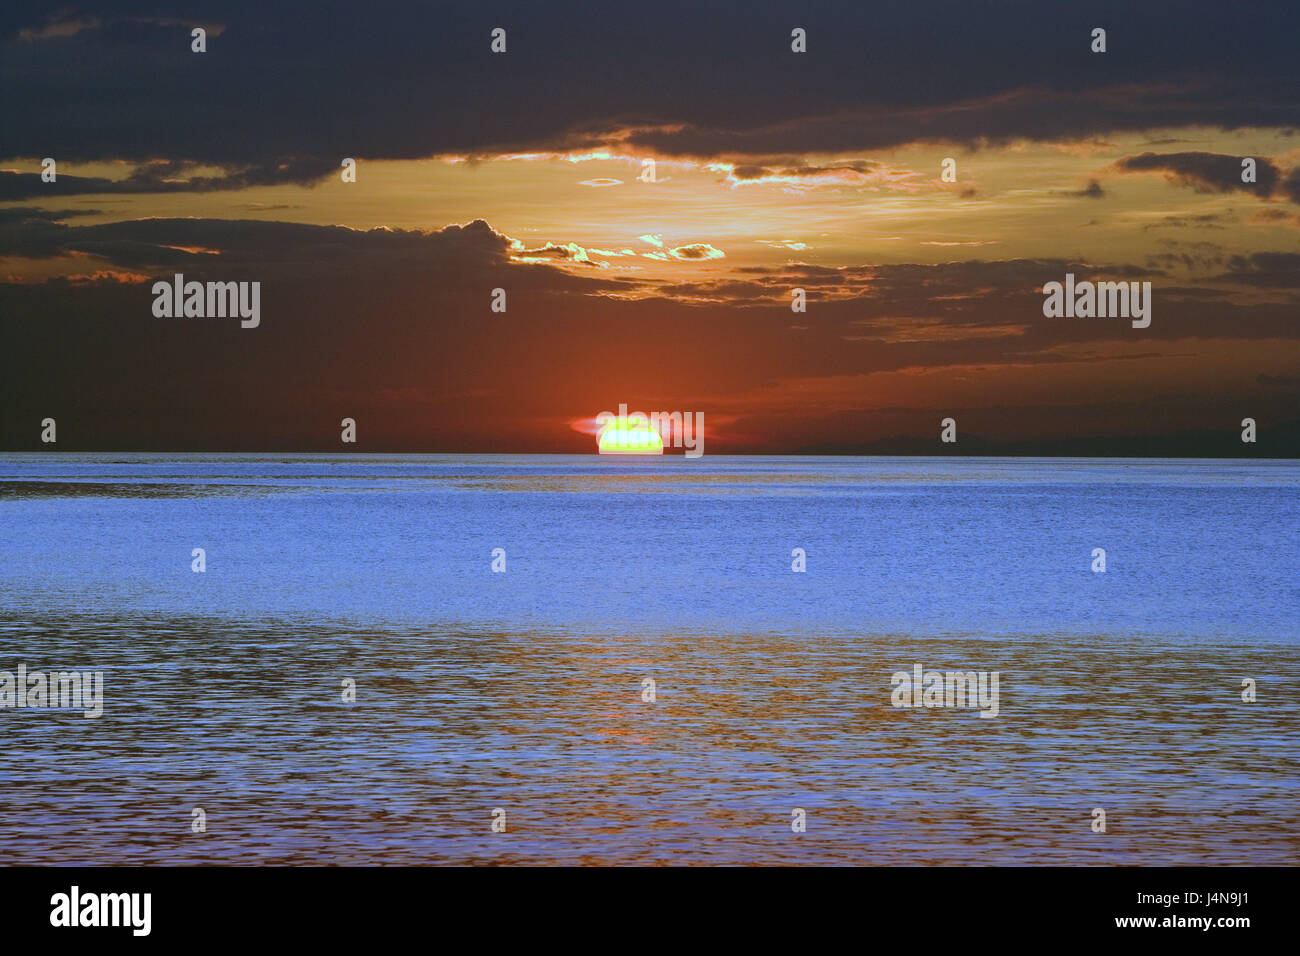 Sea, sundown, the Philippines, destination, sea view, view, fantastically, afterglow, atmospheric, sky, clouds, deserted, romanticism, Stock Photo